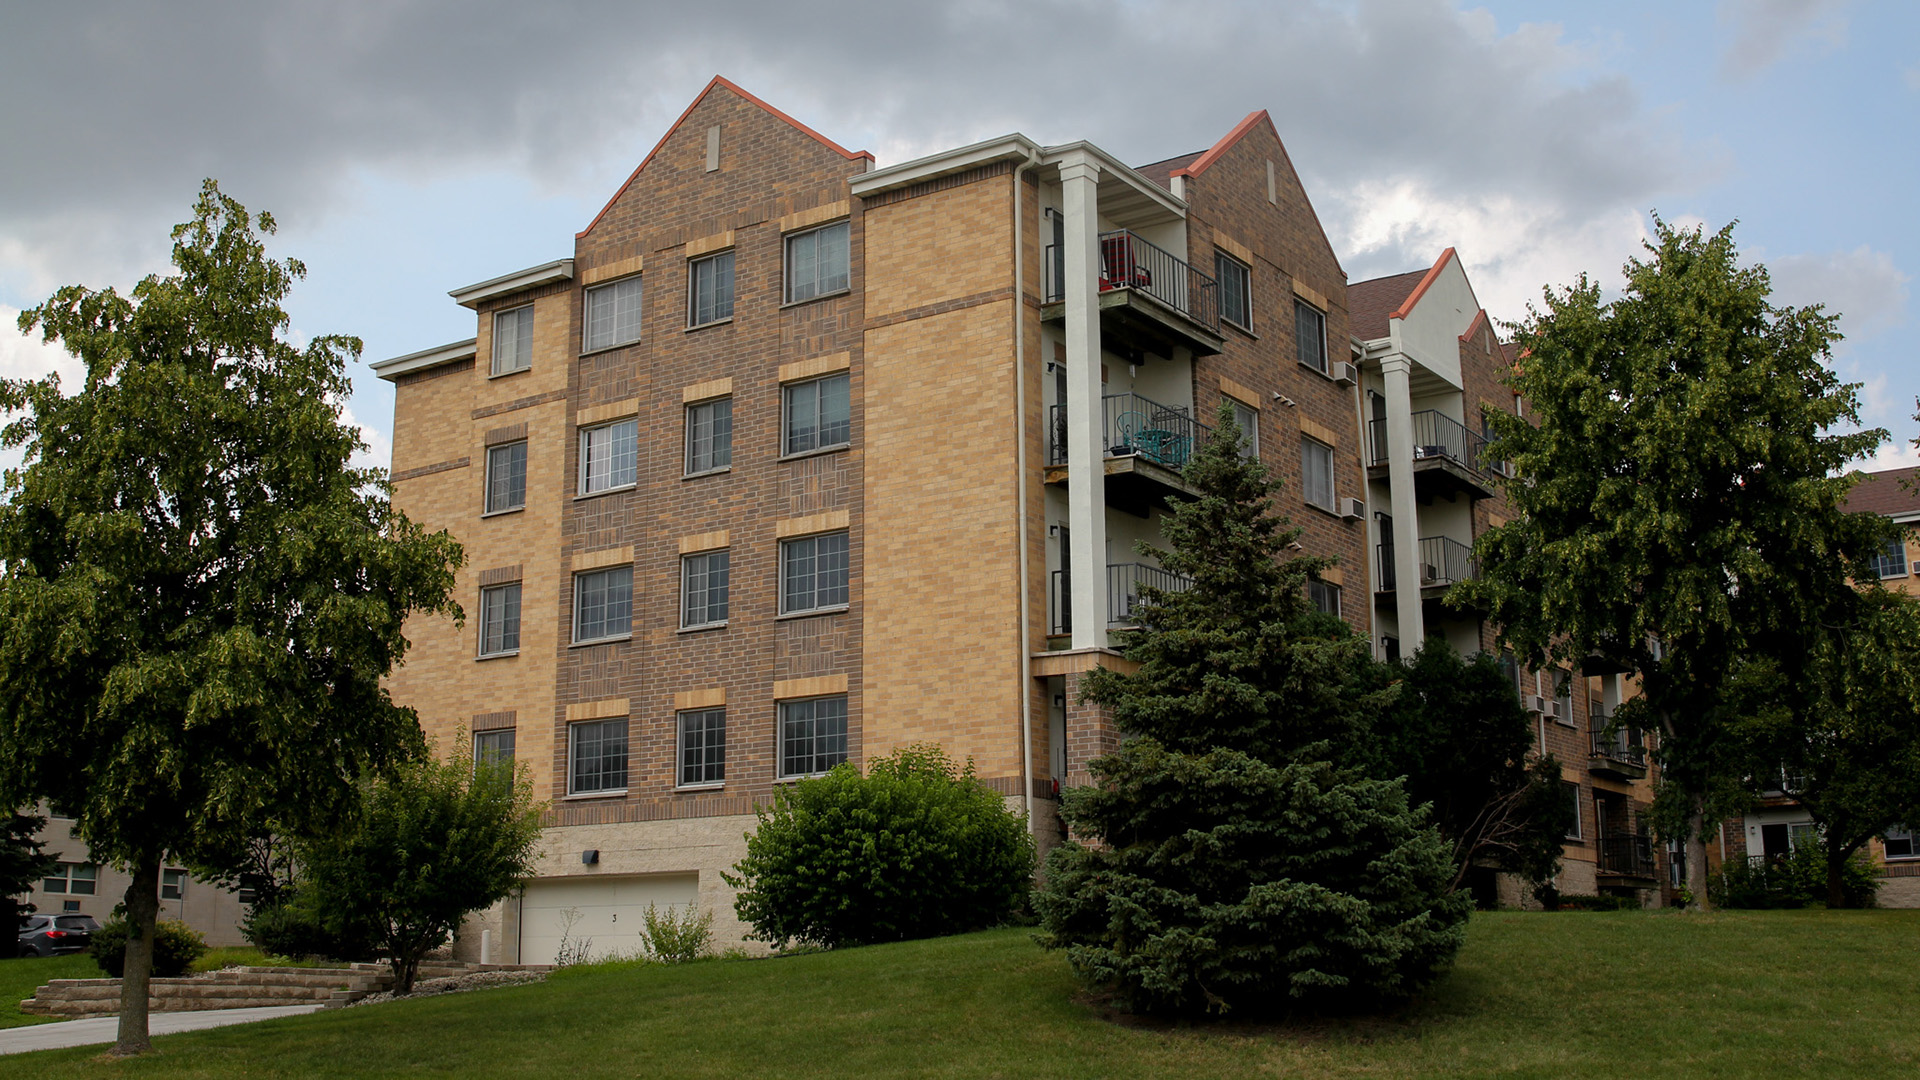 A cloud shadows a multi-story residential building with windows placed amid brick siding along one face and multiple exterior decks on another, topped by multiple gabled roofs, with trees on a lawn in the foreground.